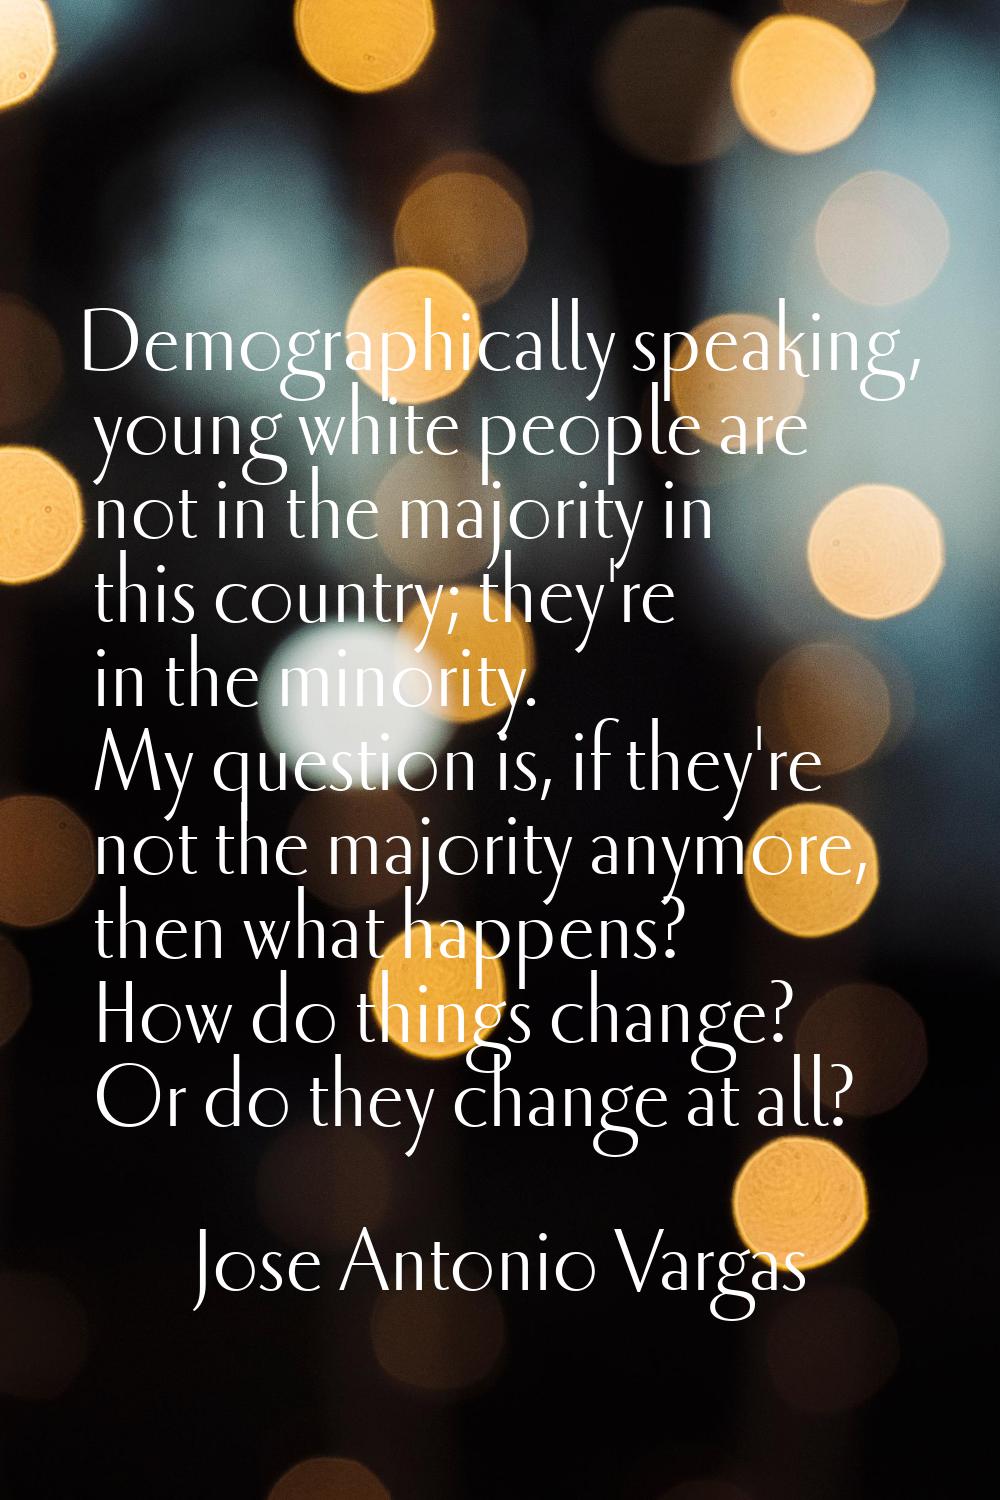 Demographically speaking, young white people are not in the majority in this country; they're in th